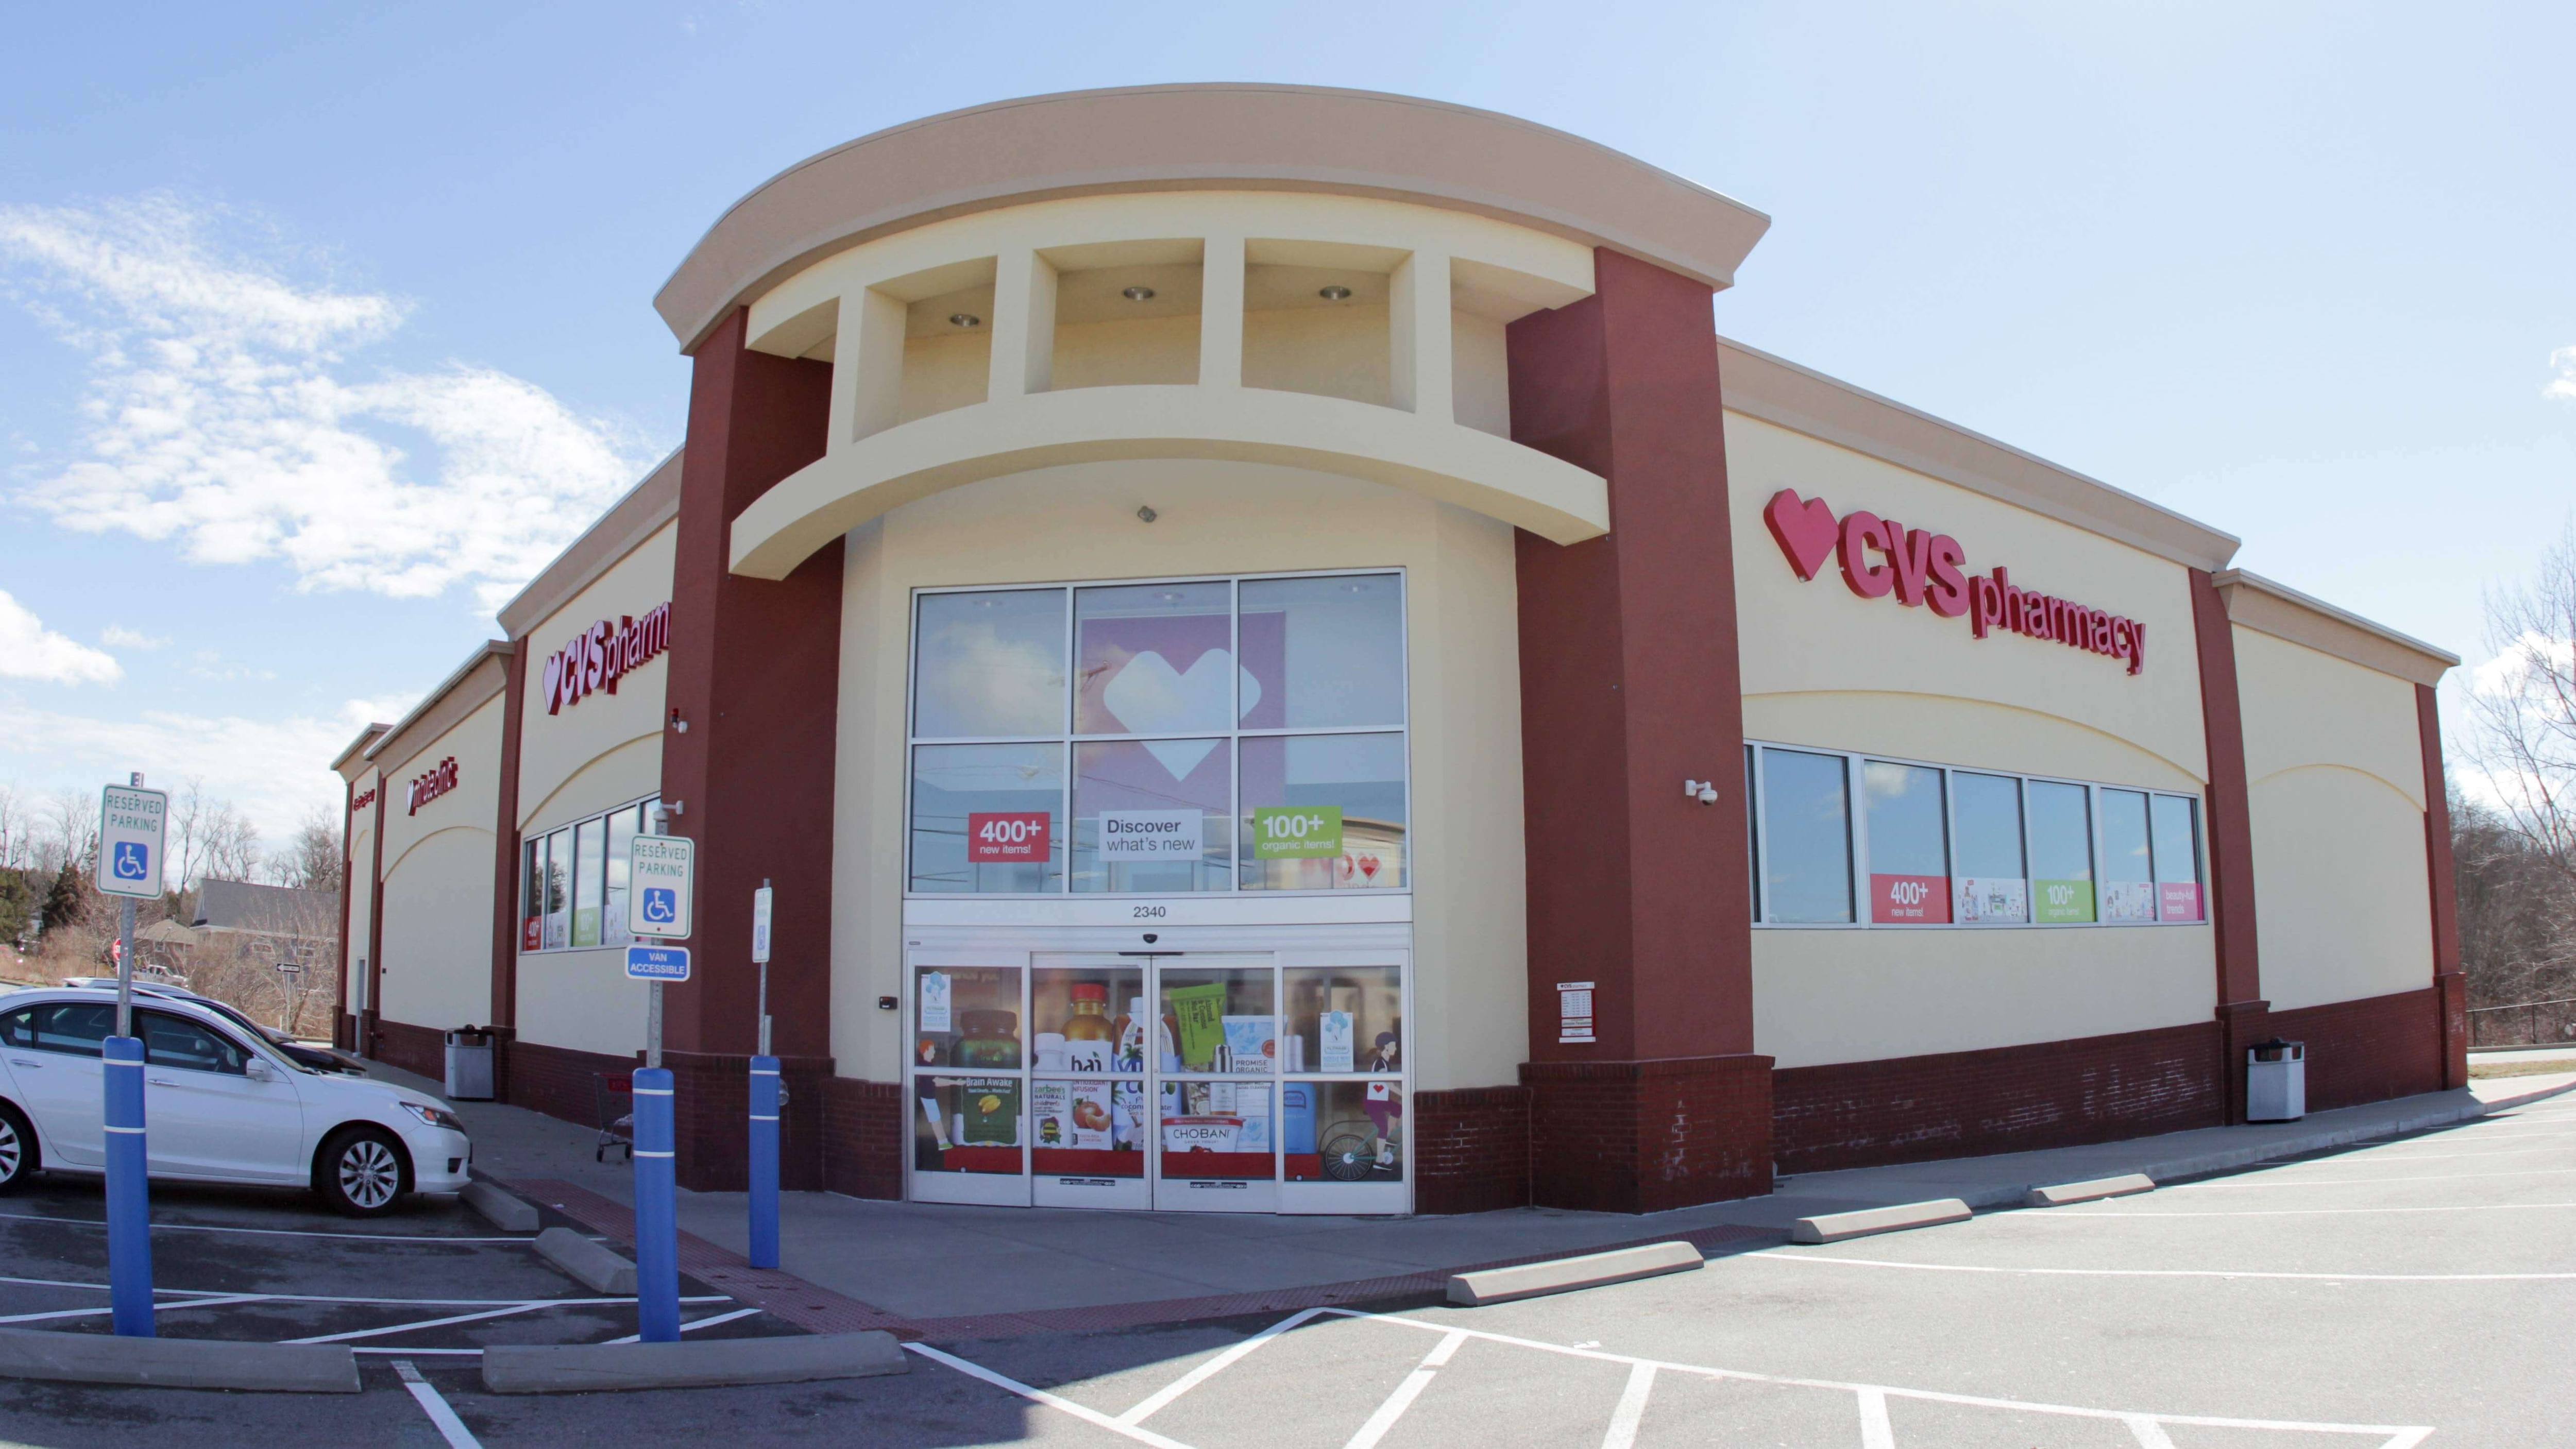 An exterior view of an unknown CVS Pharmacy store location.